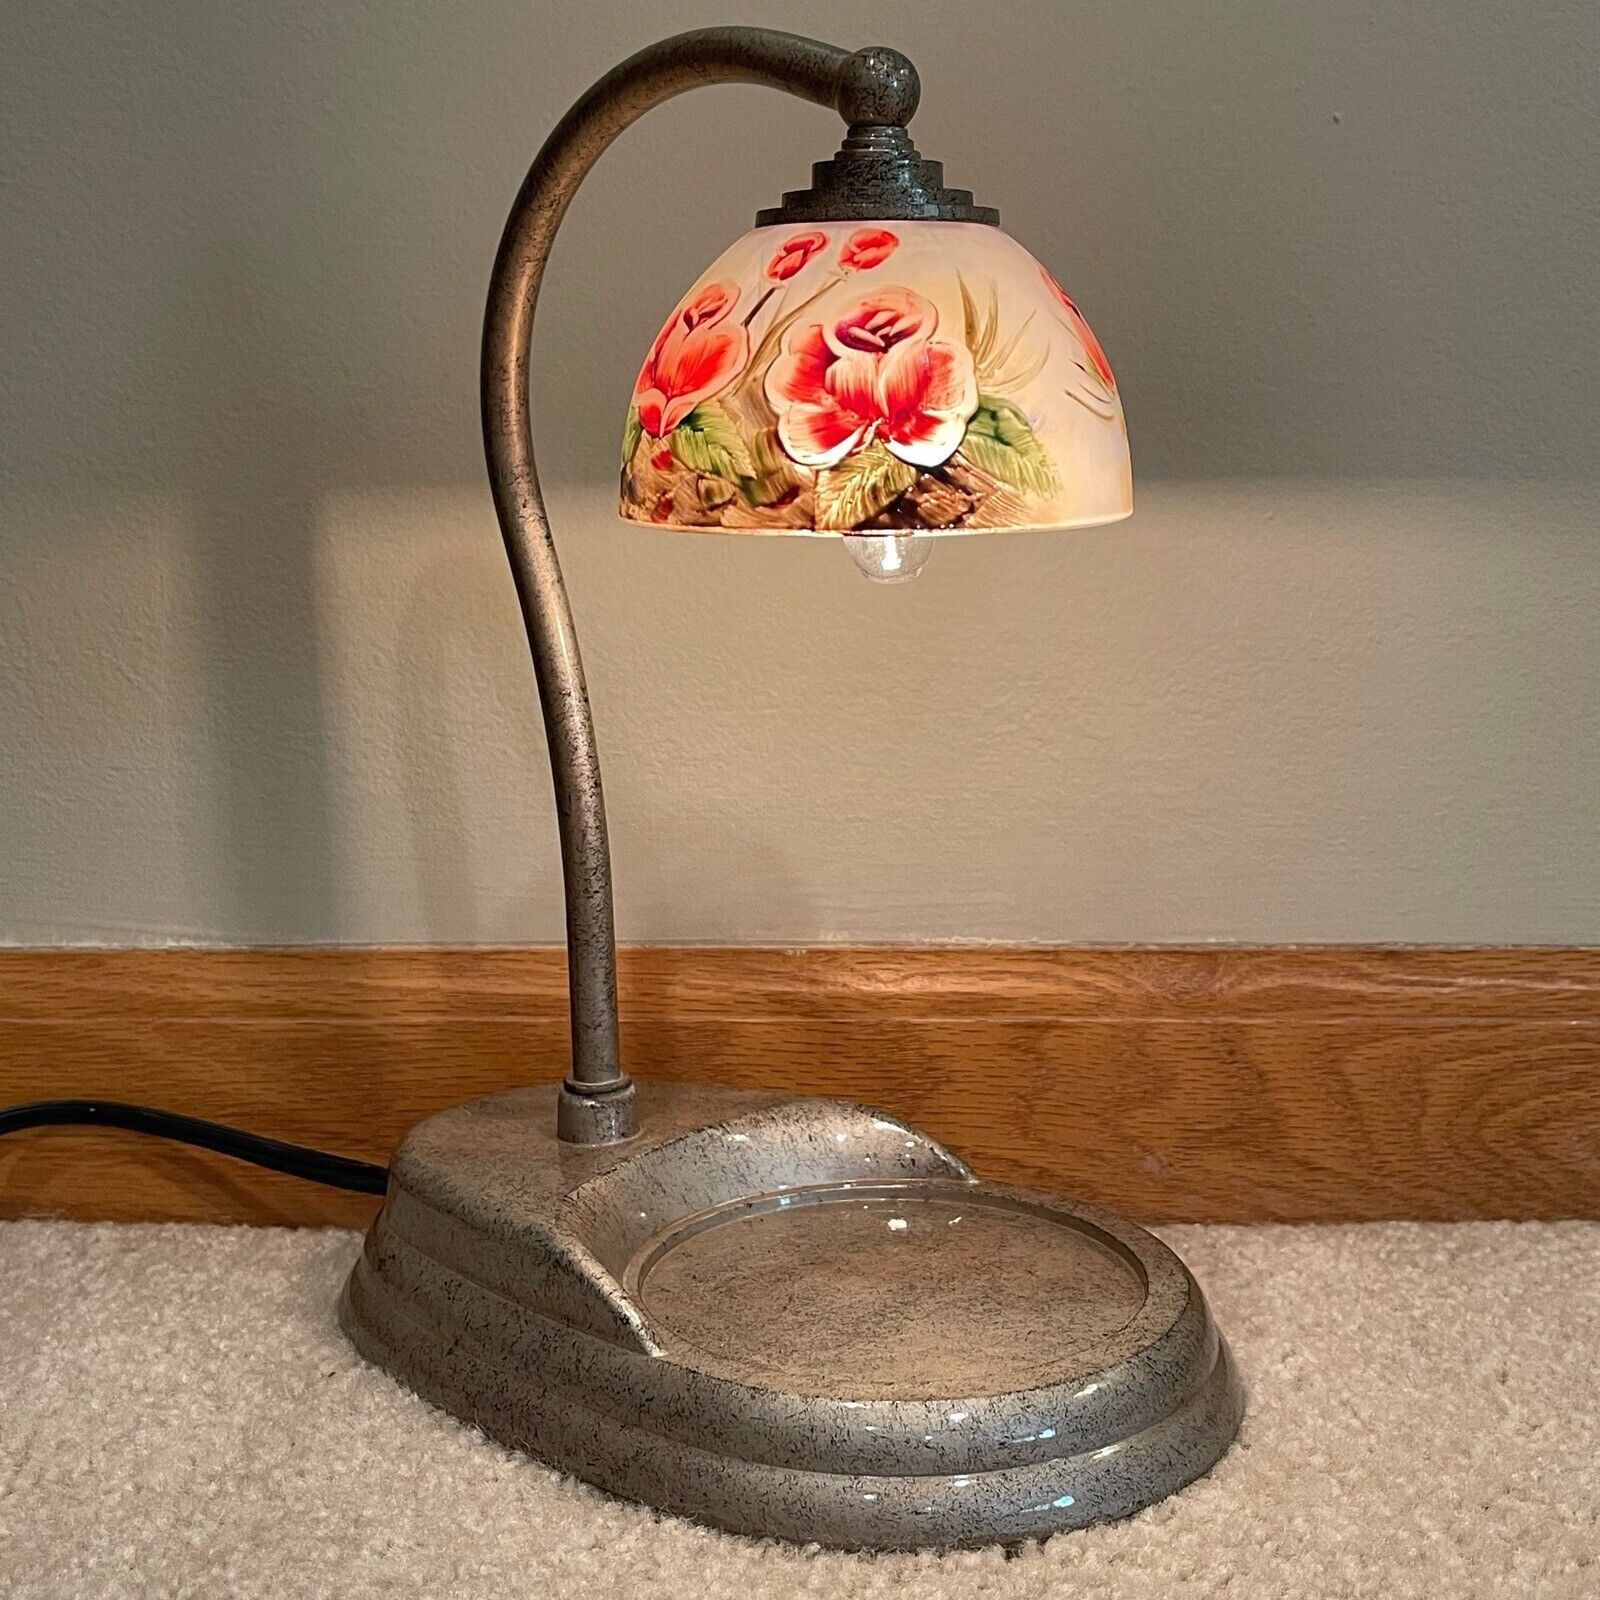 Vintage Euro-East Rose Flower Painted Stained Glass 11” Table Lamp with Tray VGC